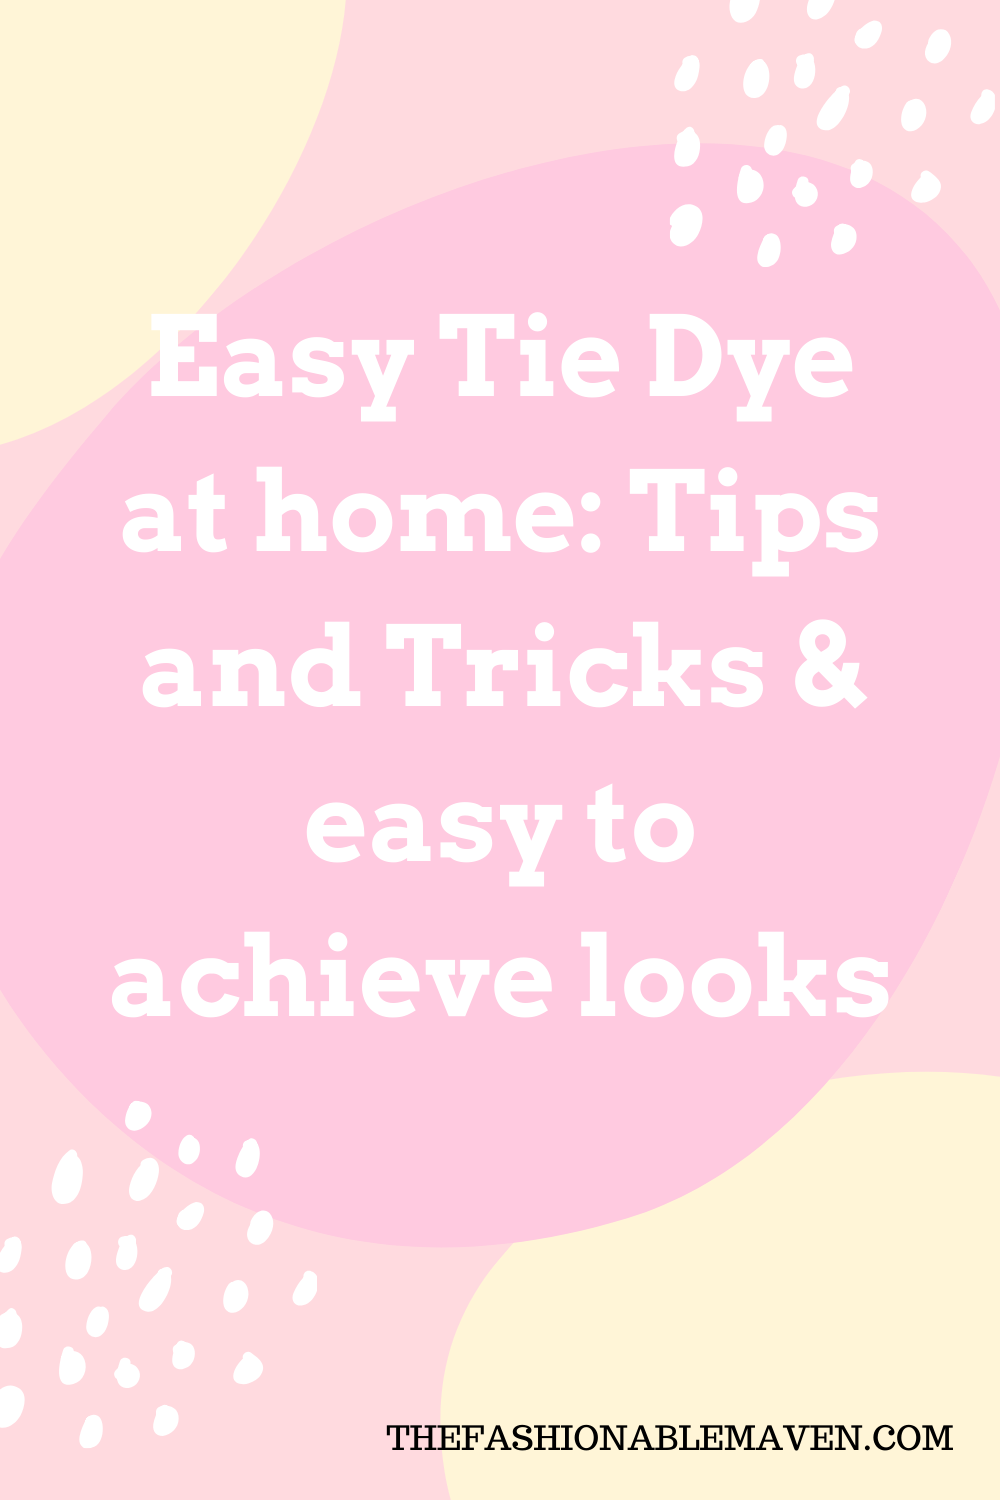 How To Tie Dye Shirts Tips And Tricks For Beginners The Fashionable Maven 